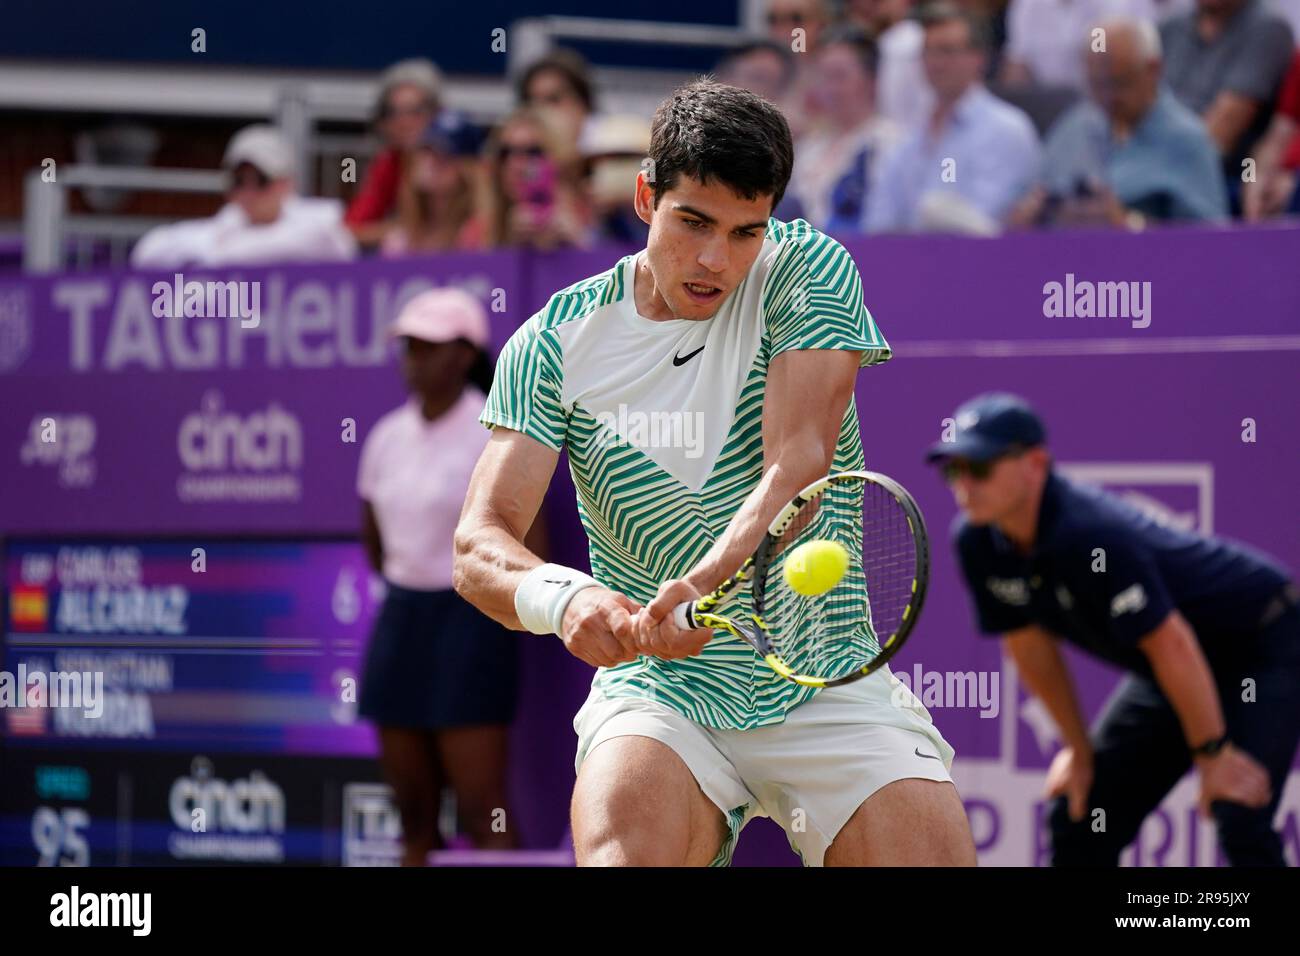 Carlos Alcaraz, of Spain, returns with a backhand to Sebastian Korda, of the US, during their mens singles semifinal match at the Queens Club tennis tournament in London, Saturday, June 24, 2023.